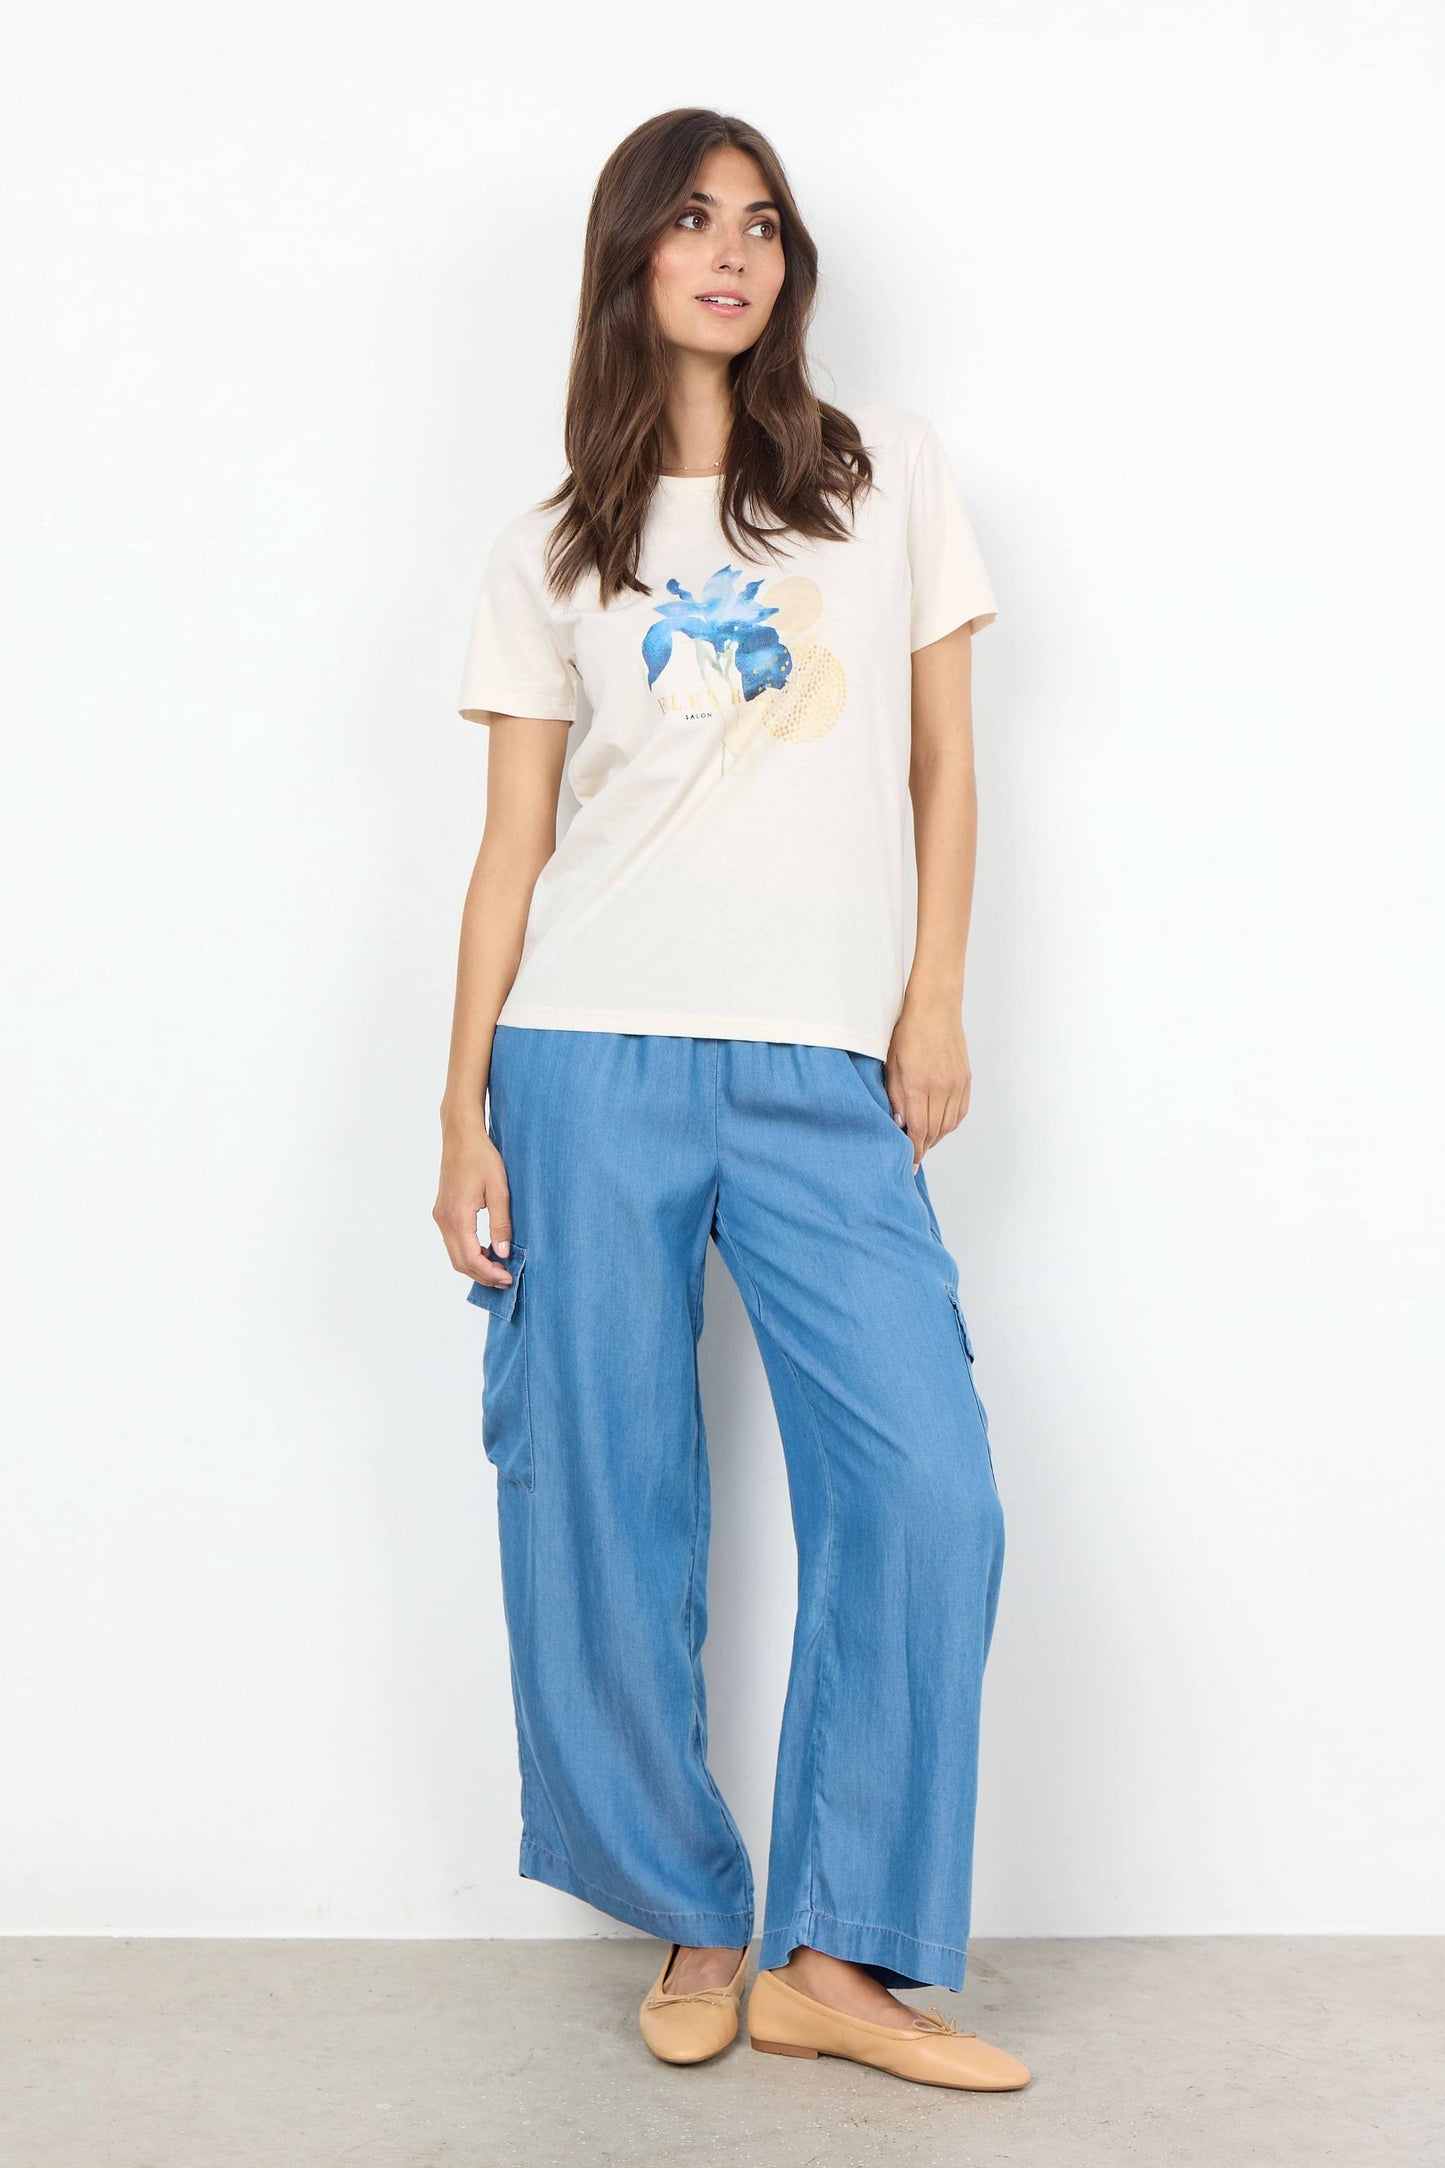 Derby T-Shirt in Crystal Blue T-Shirt Soyaconcept 